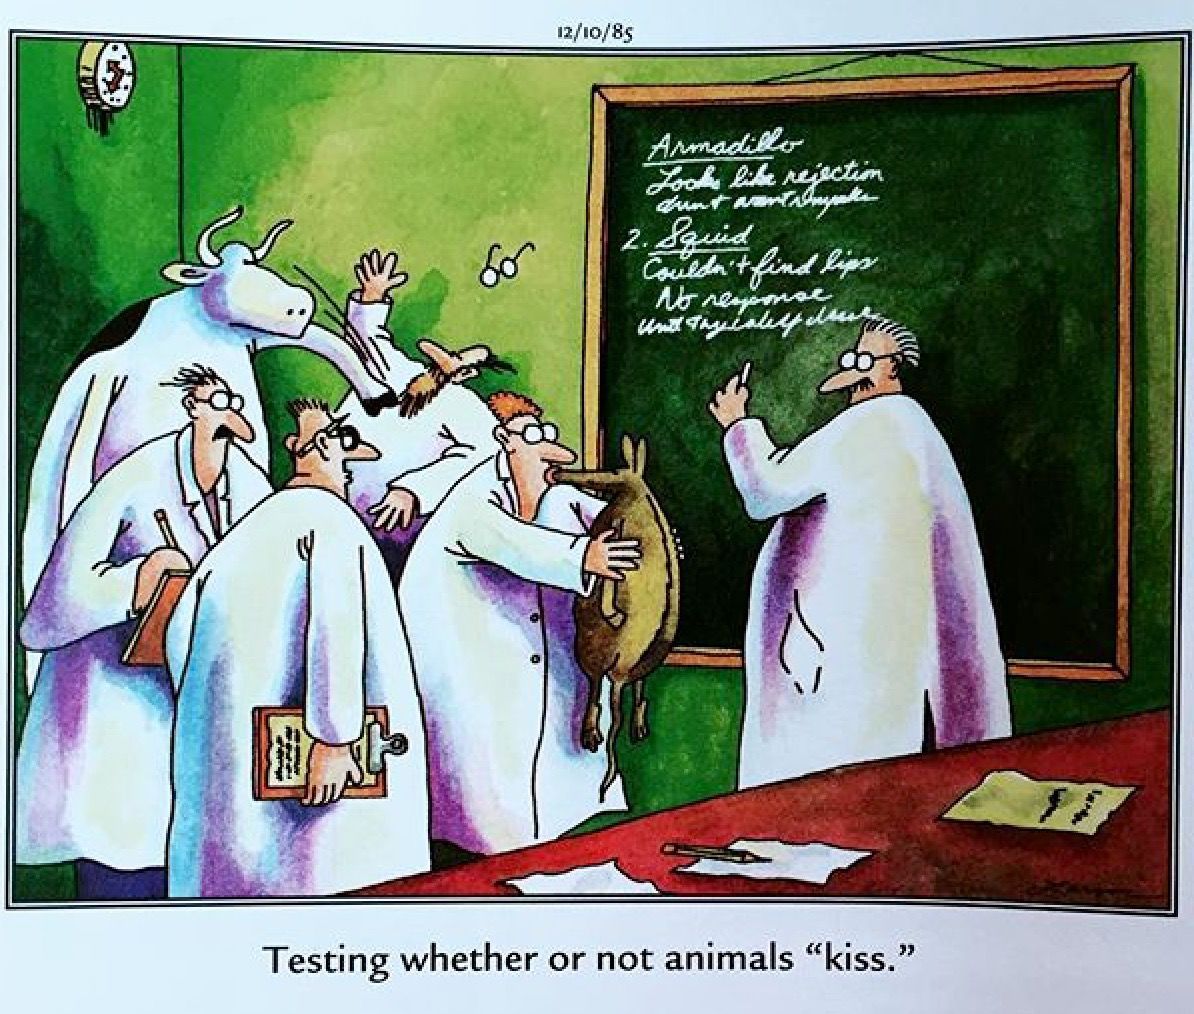 far side comic captioned "testing whether or not animals 'kiss'" and scientist kissing various animals